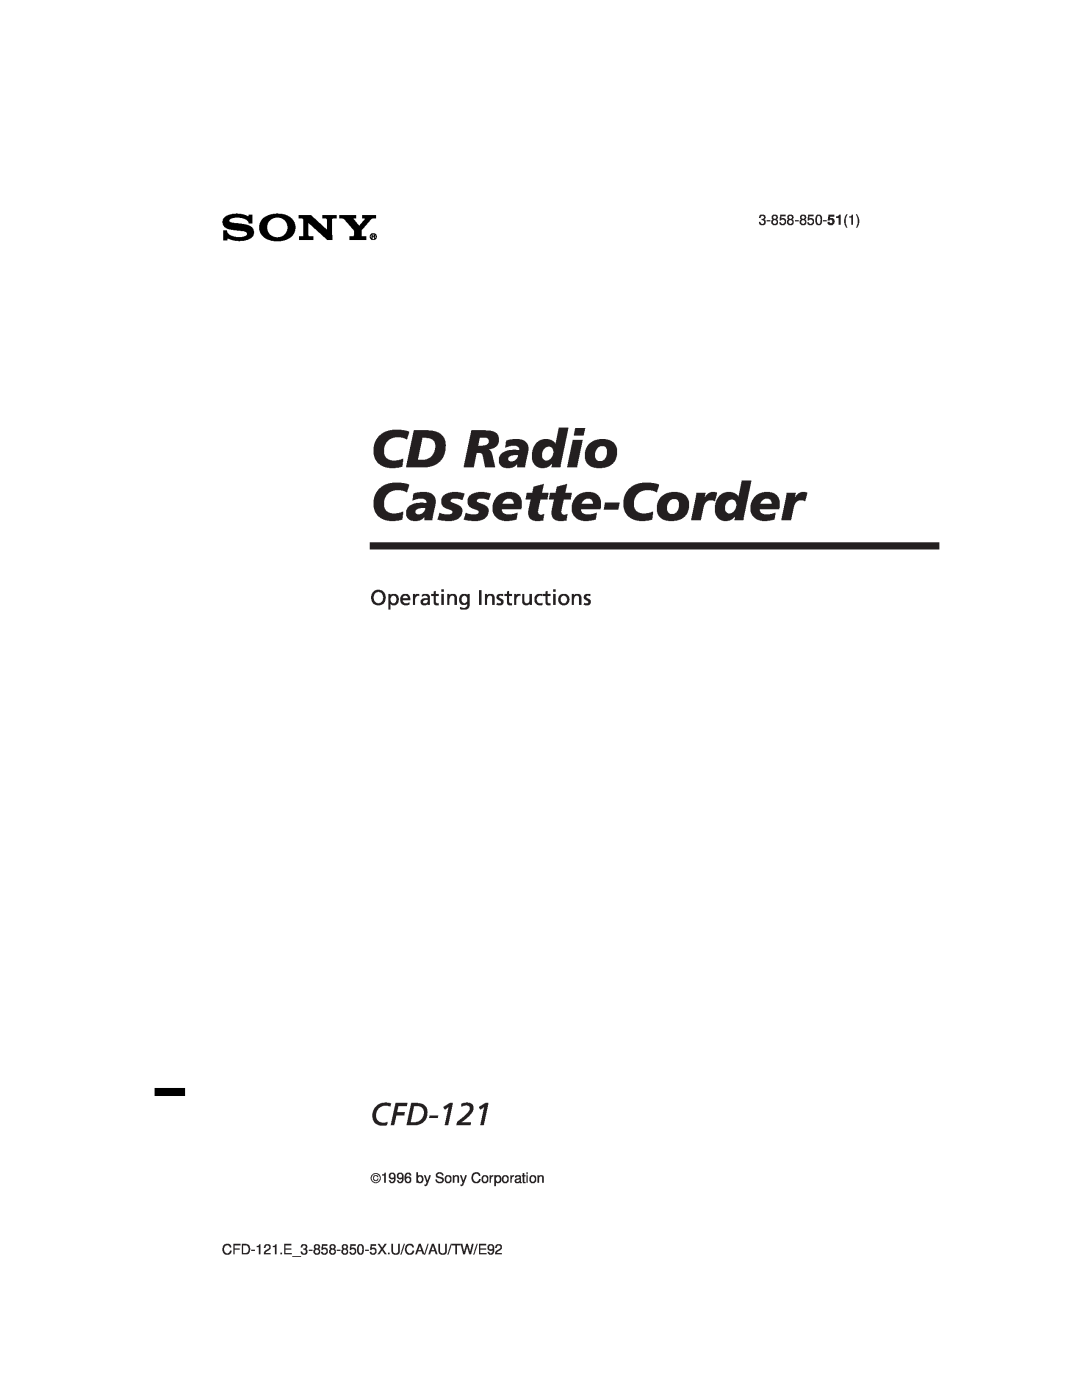 Sony CFD-121 operating instructions CD Radio Cassette-Corder, Operating Instructions, page 2EN, Bedienungsanleitung 